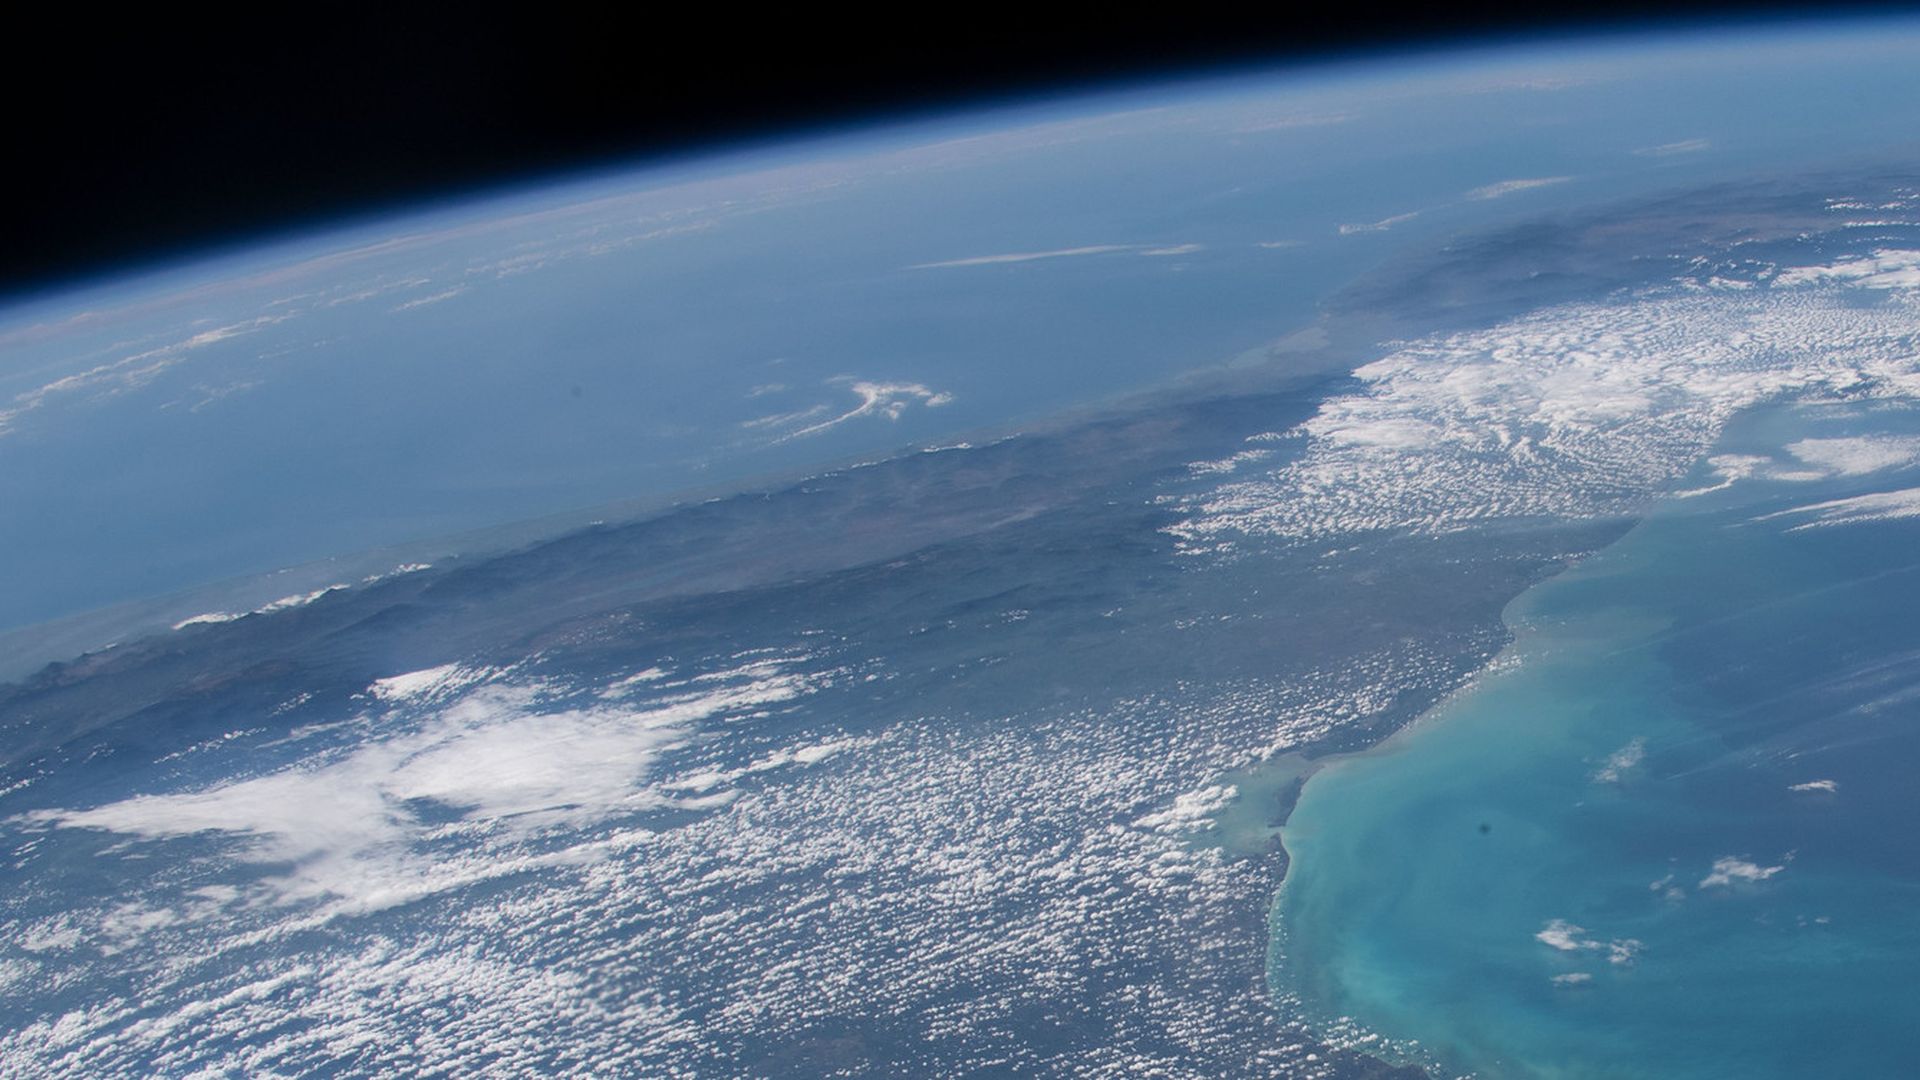 A view of Earth from space above the ocean